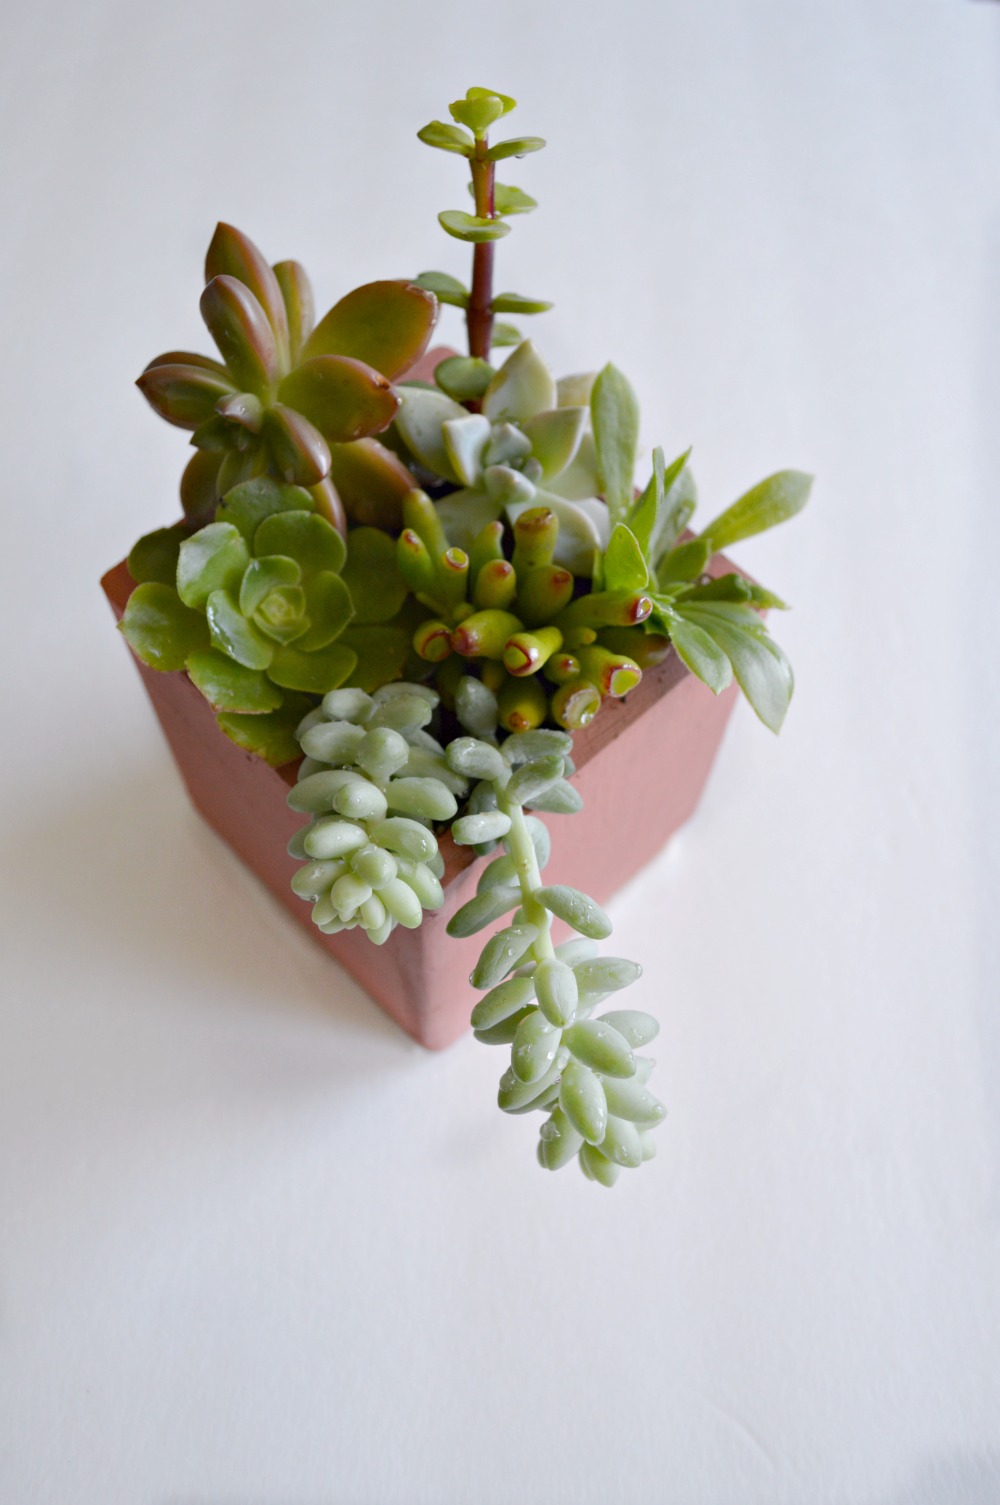 Learn how to make a beautiful succulent display using a old wooden box